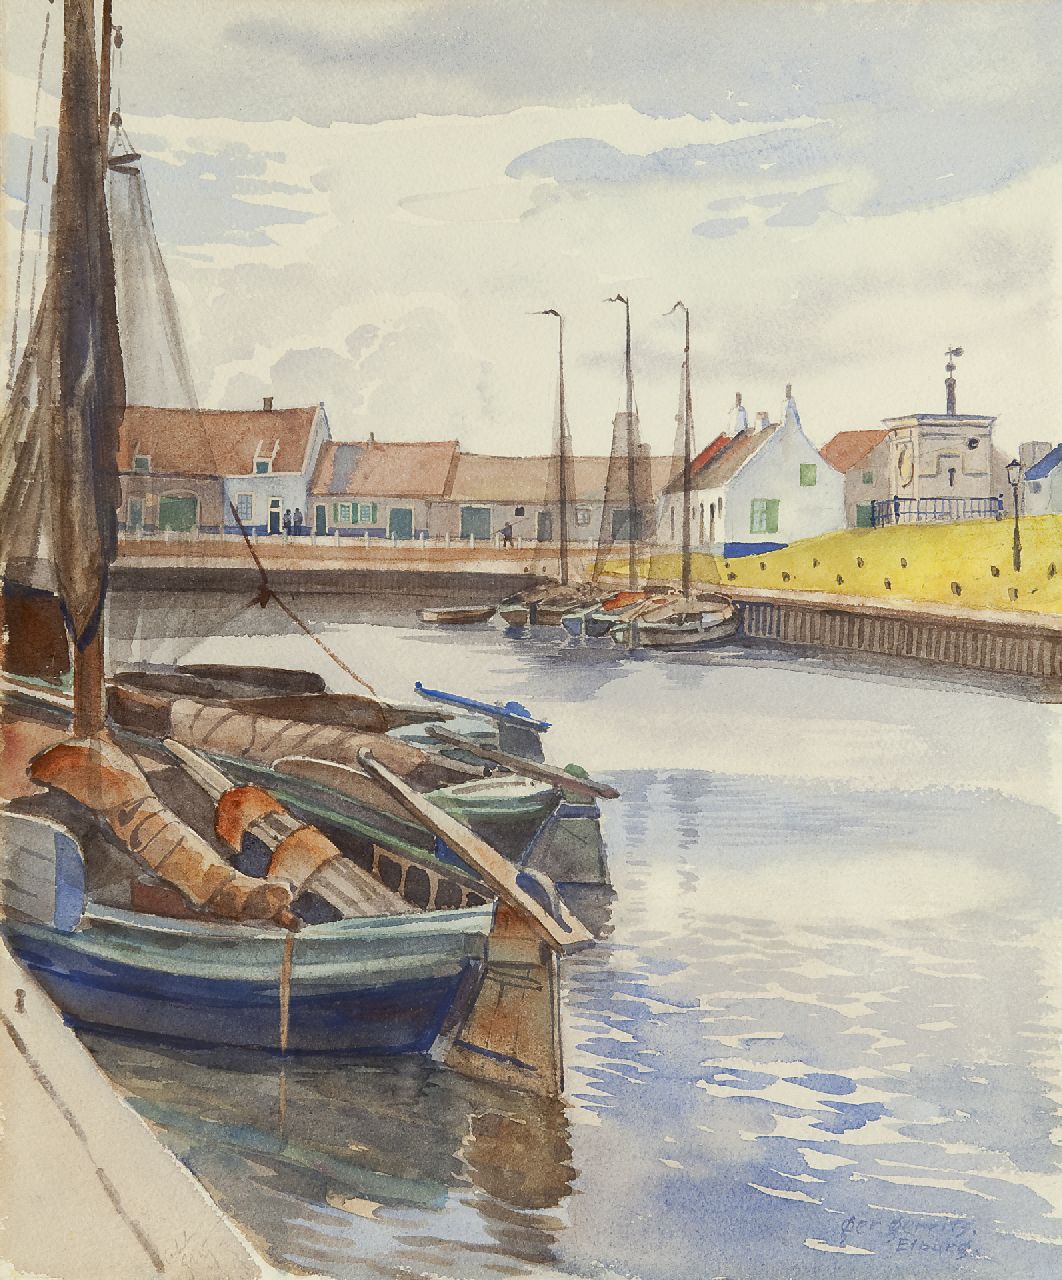 Ger Gerrits | Harbourview, Elburg, watercolour on paper, 37.7 x 30.9 cm, signed l.r. and painted ca. 1939